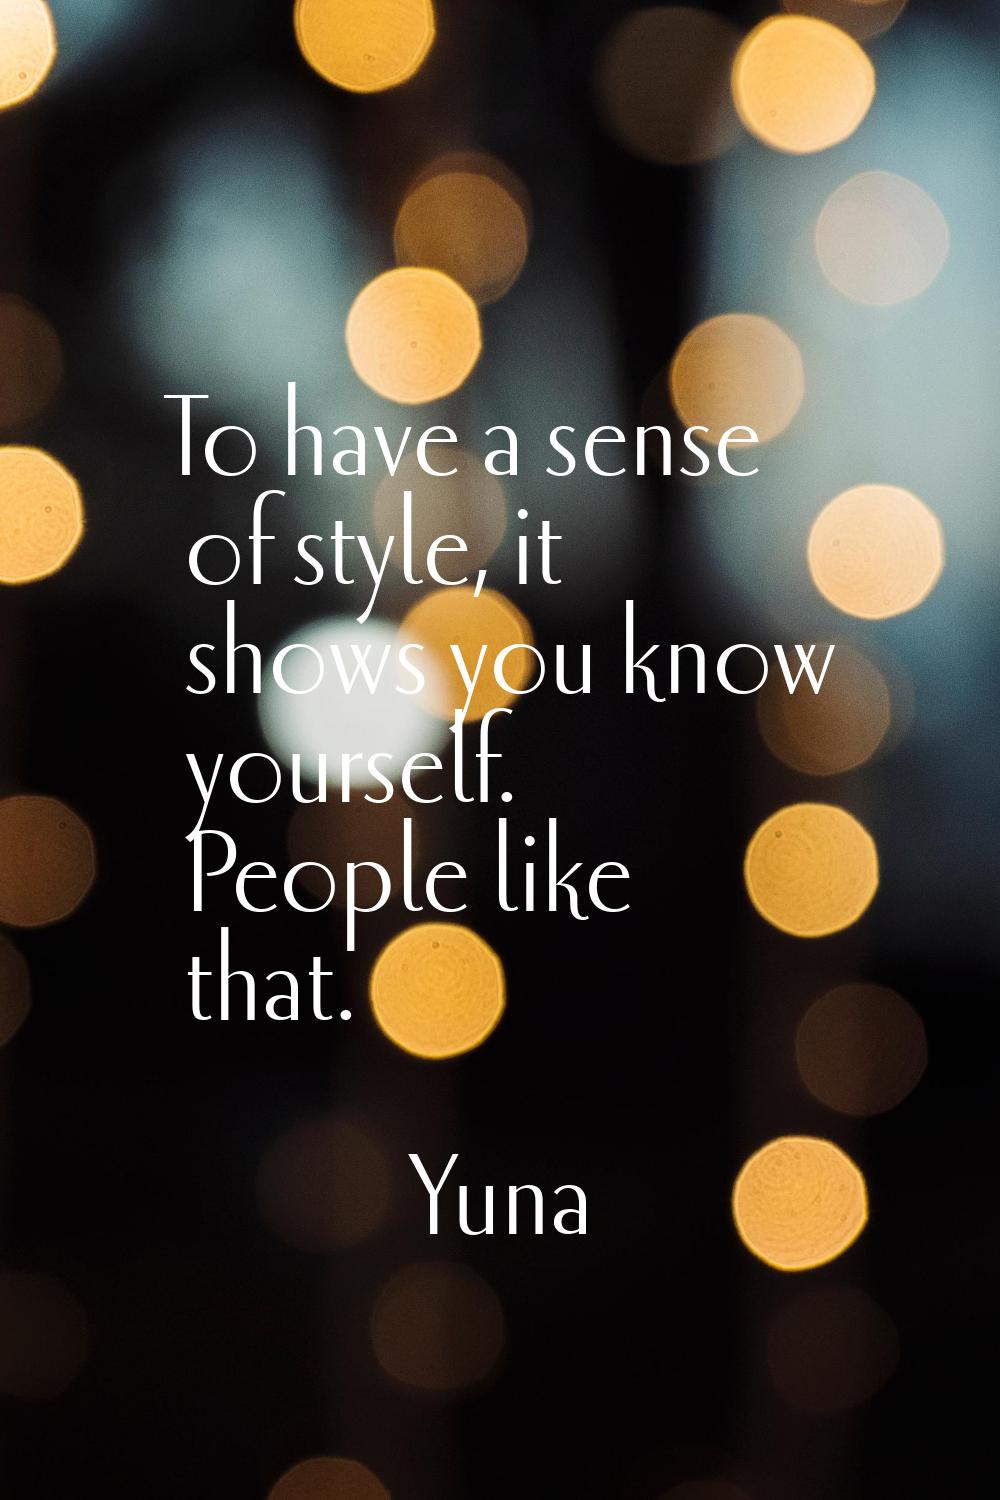 To have a sense of style, it shows you know yourself. People like that.